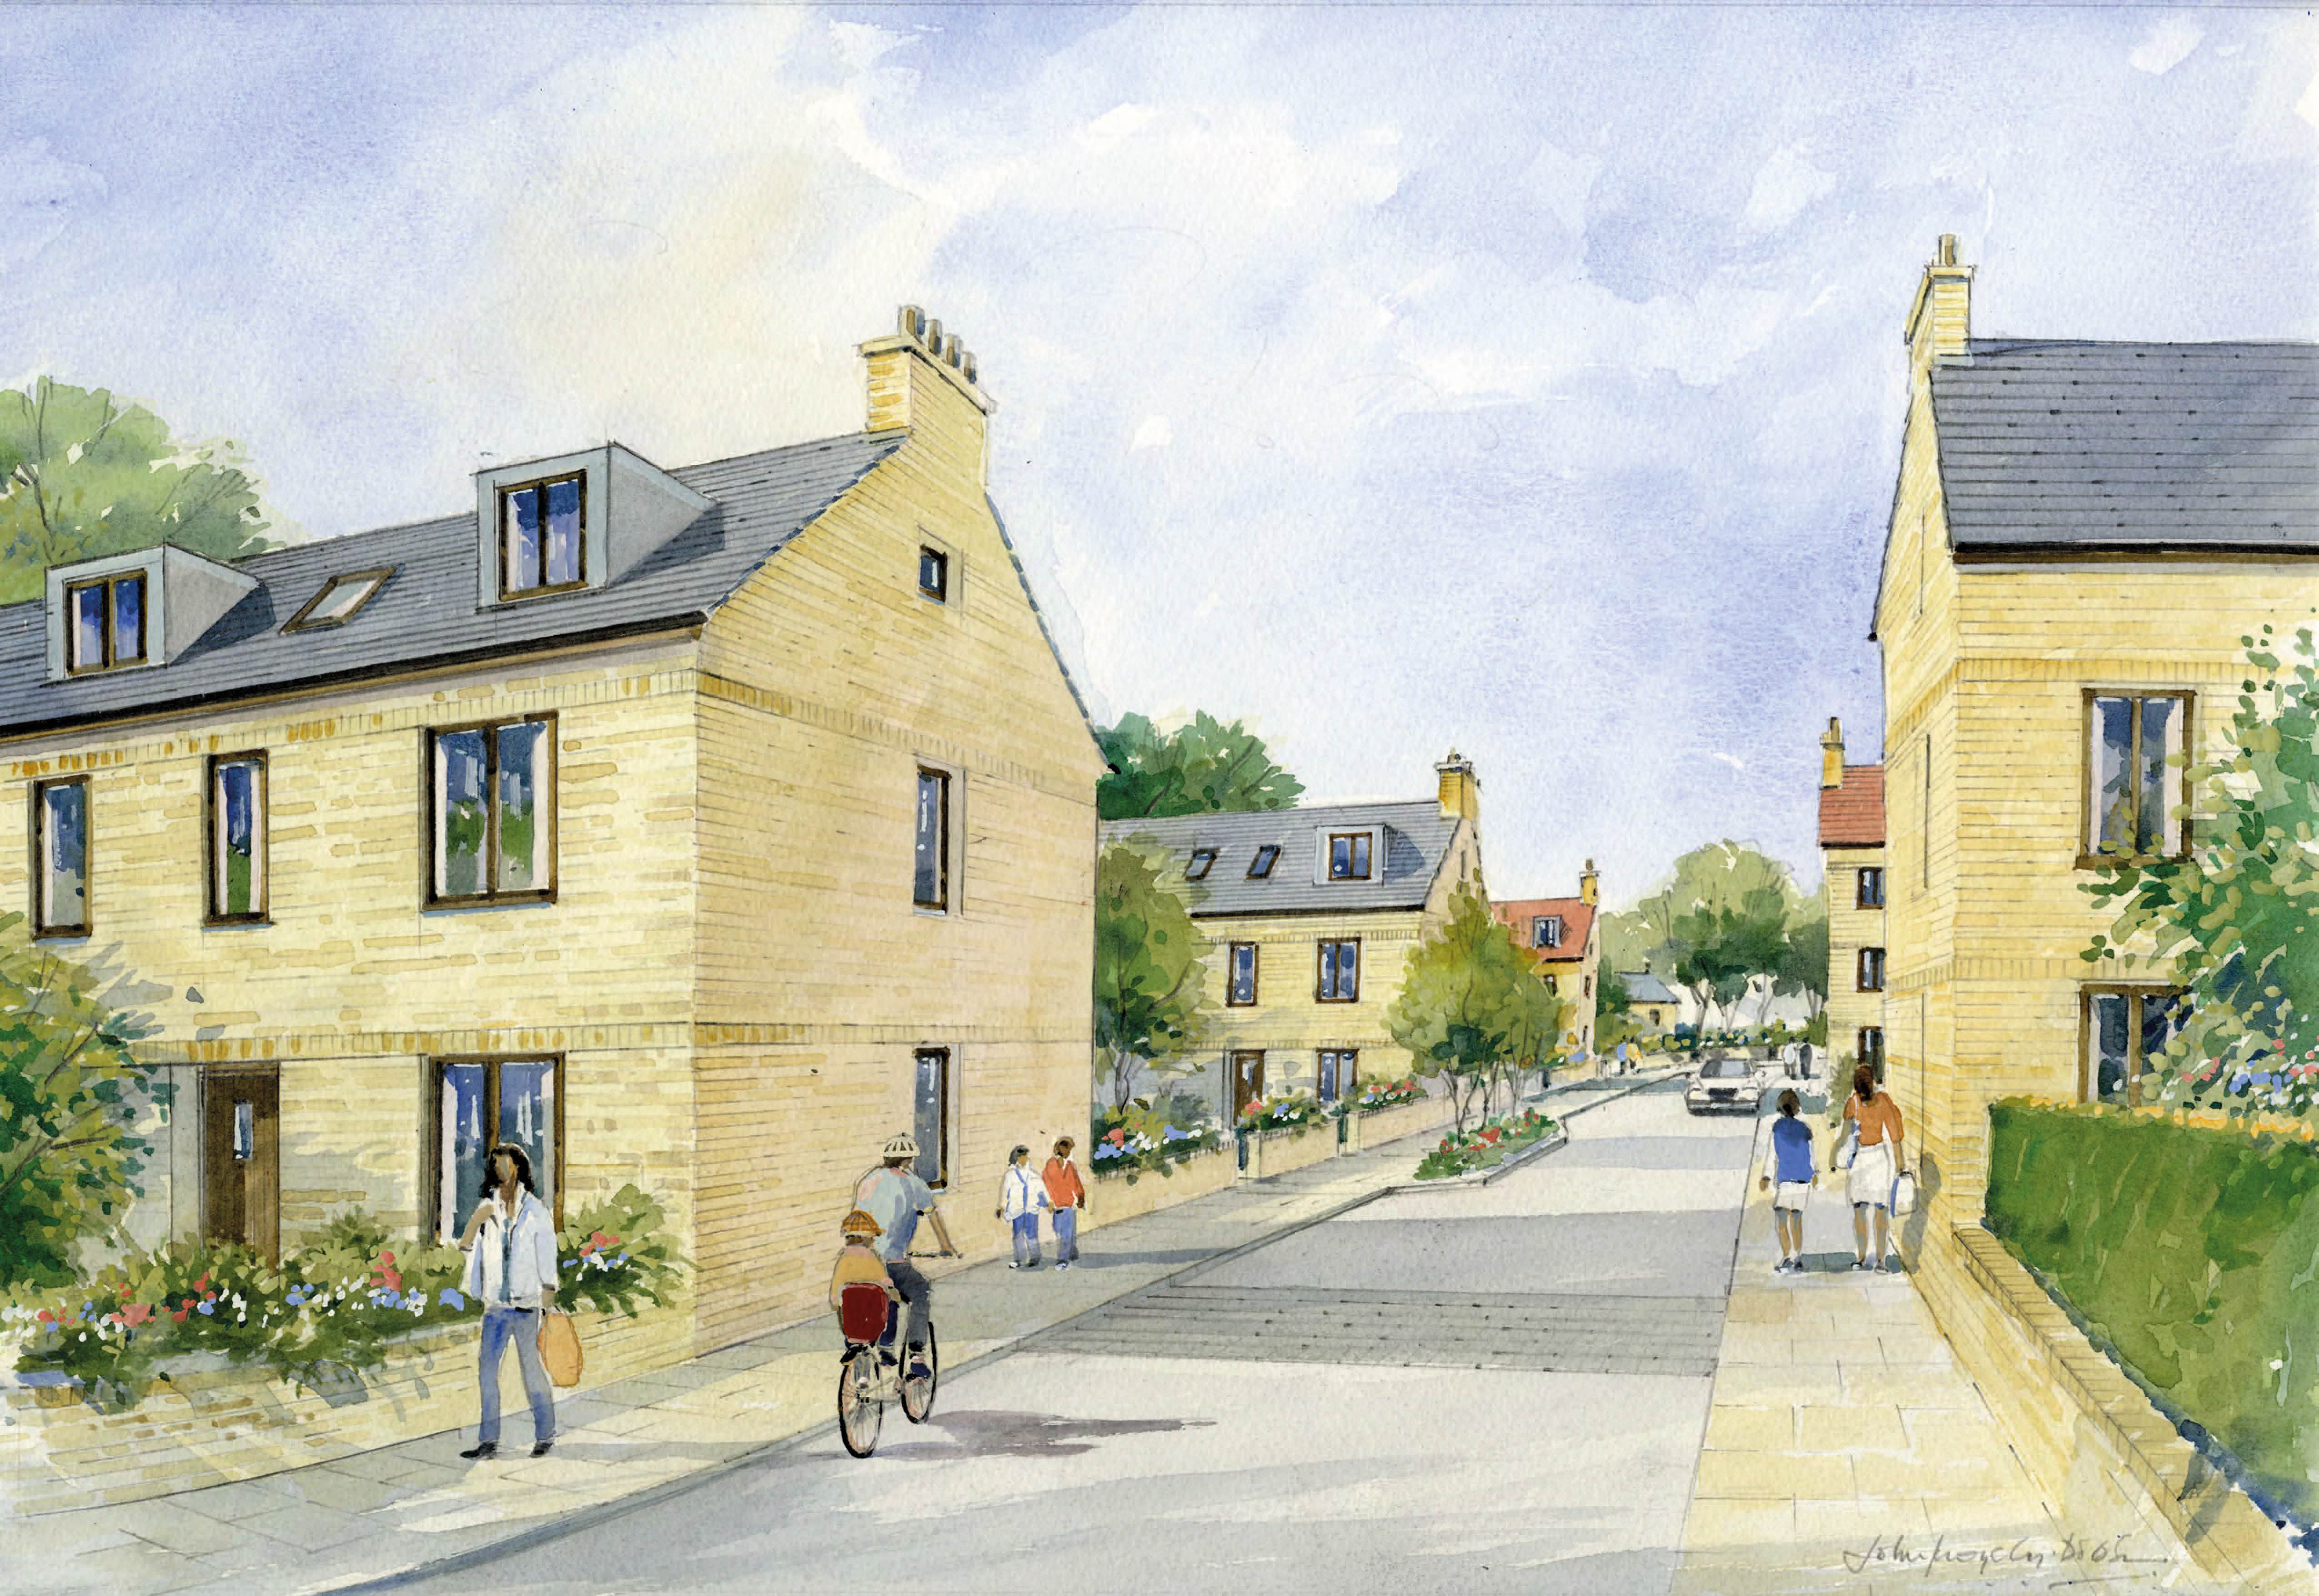 Community: Elan Homes (Scotland) will build the homes if permission is granted.